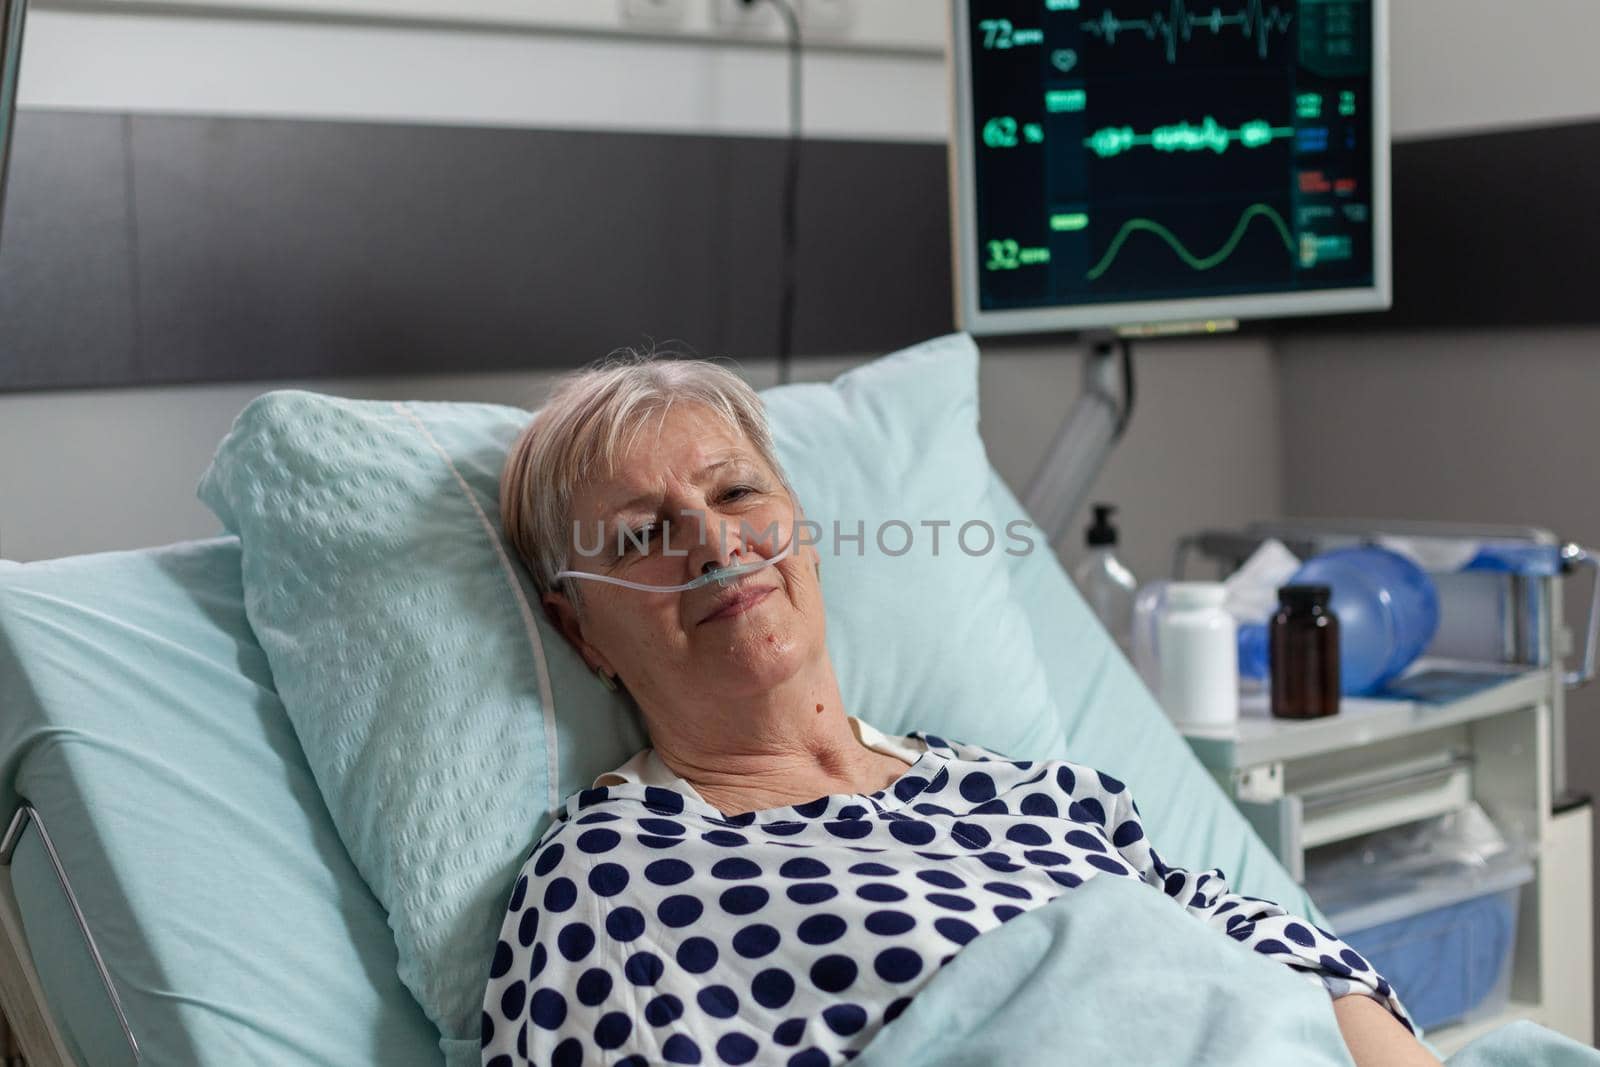 Senior elderly person with pulmonary failure breathing with help from oxygen mask, laying in hospital bed, getting treatment through iv drip bag. Patient bmp on monitor.